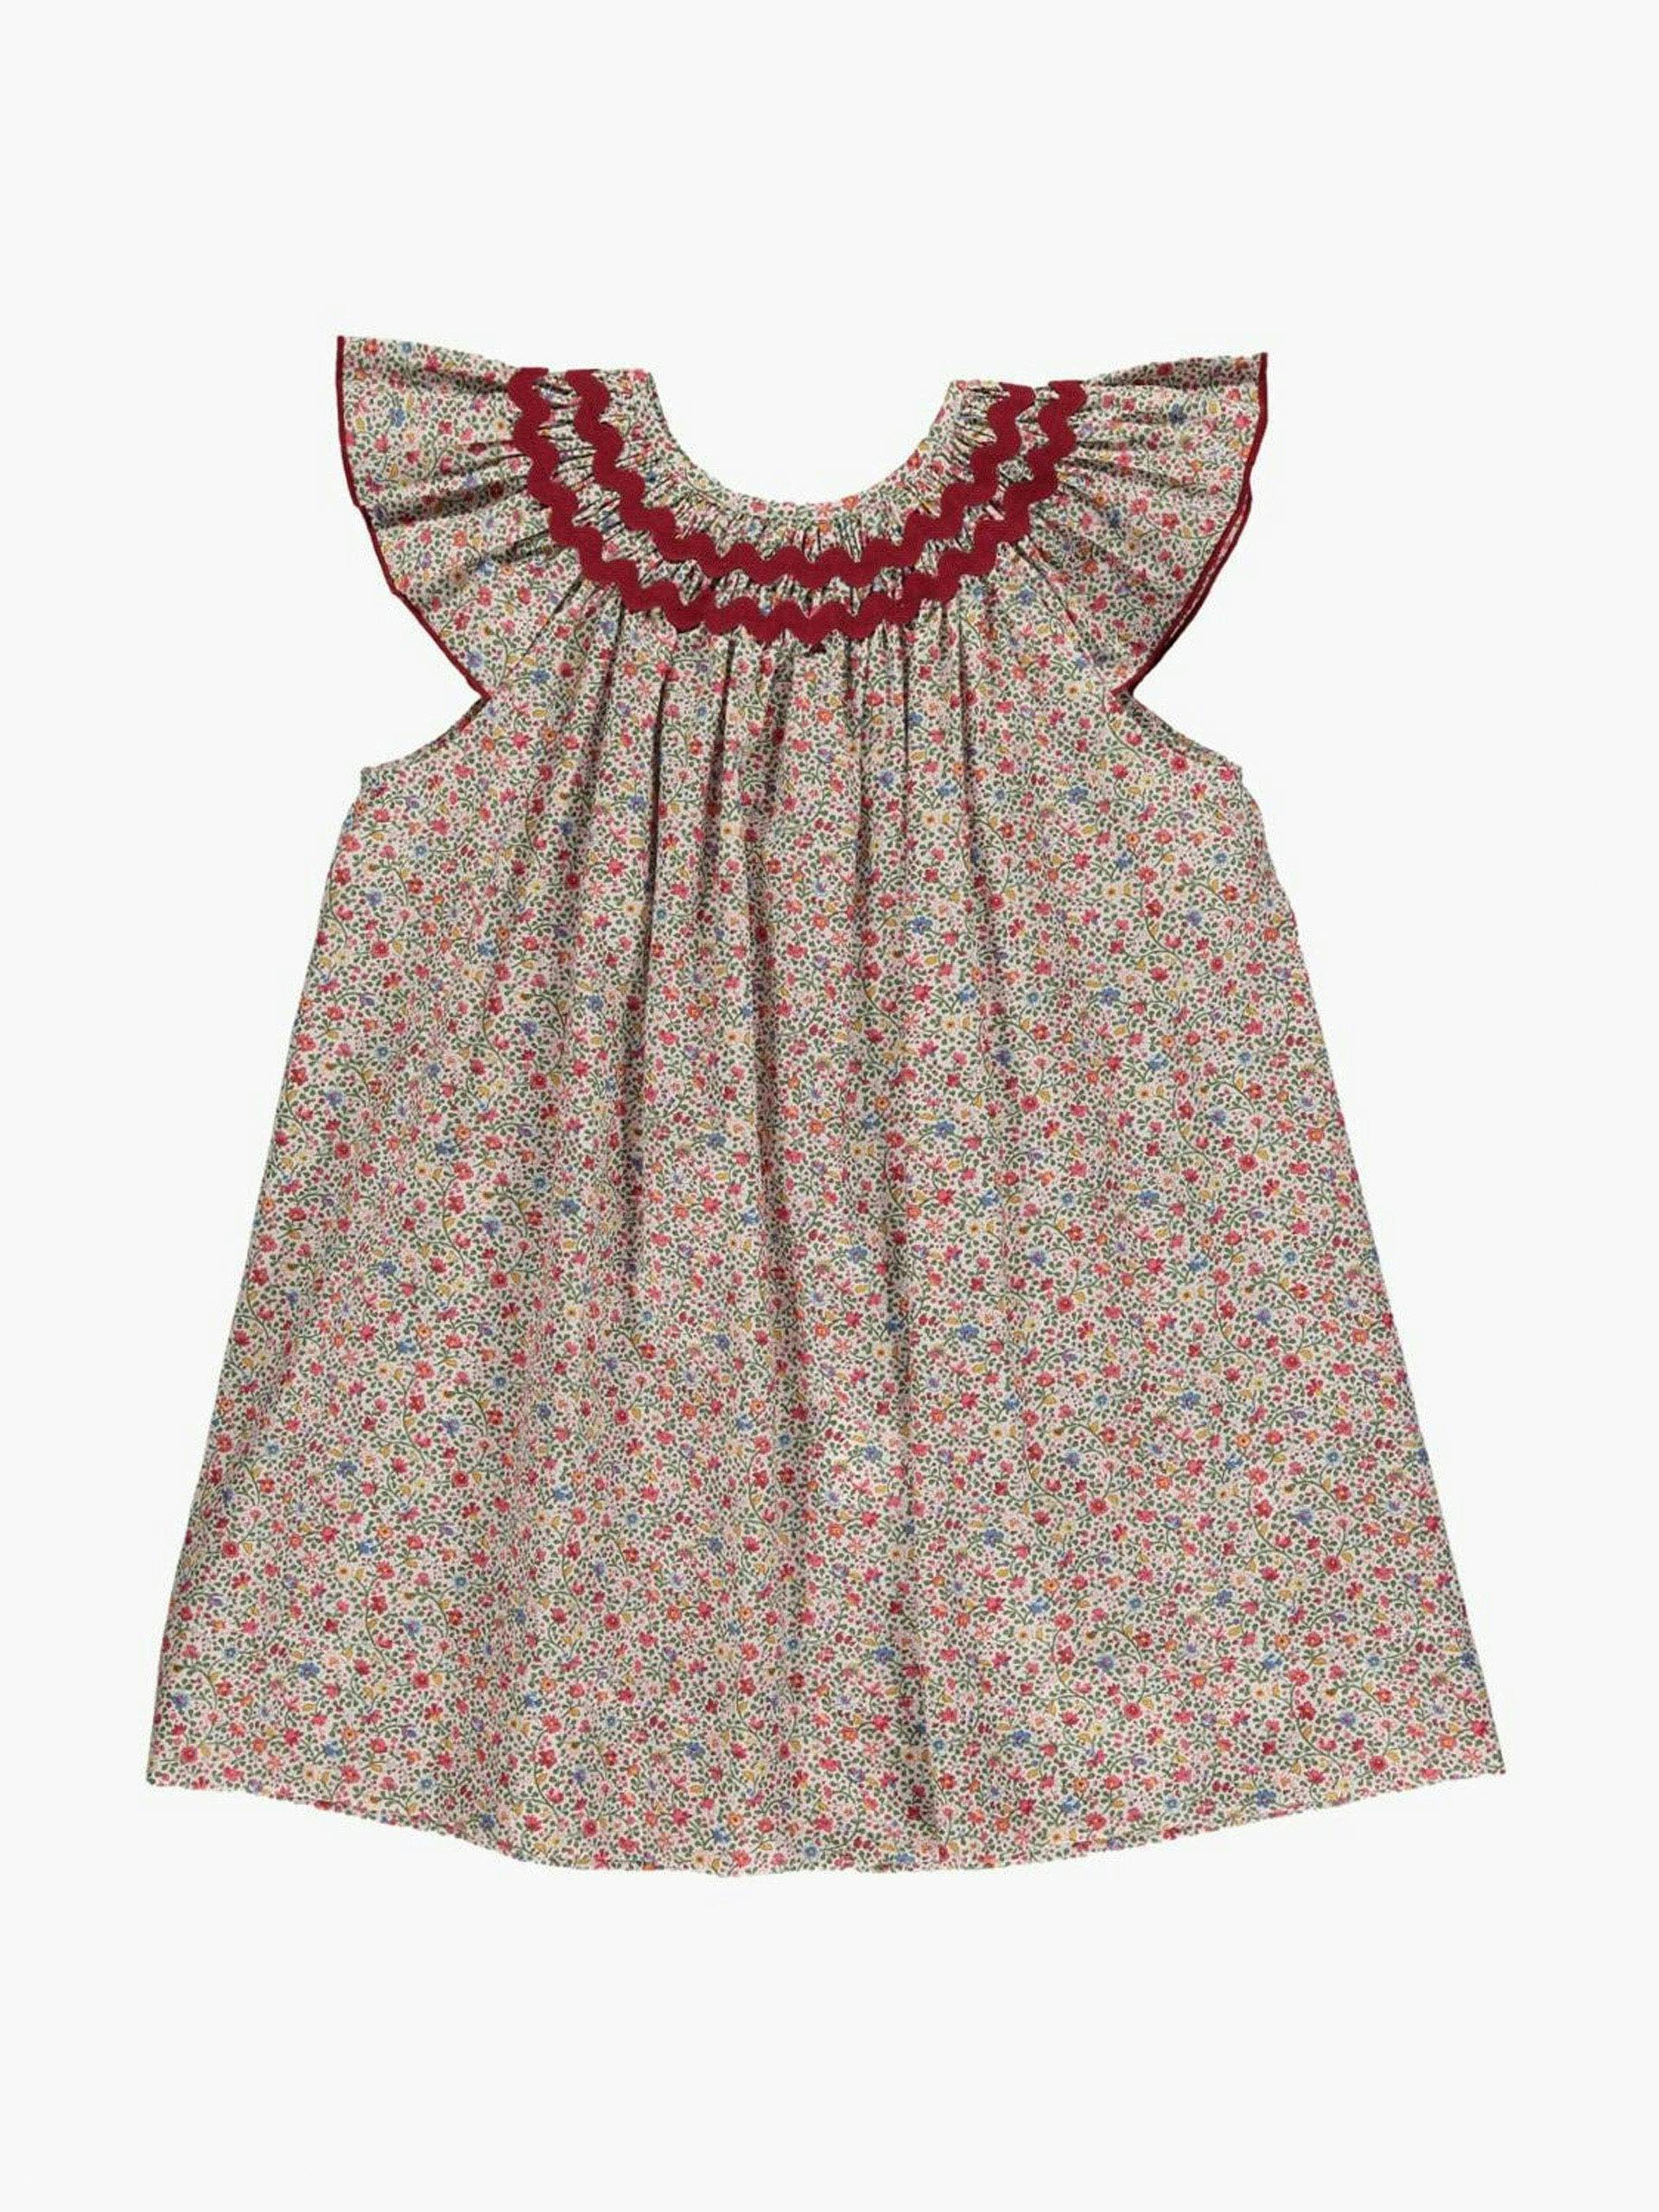 Butterfly camille liberty dress